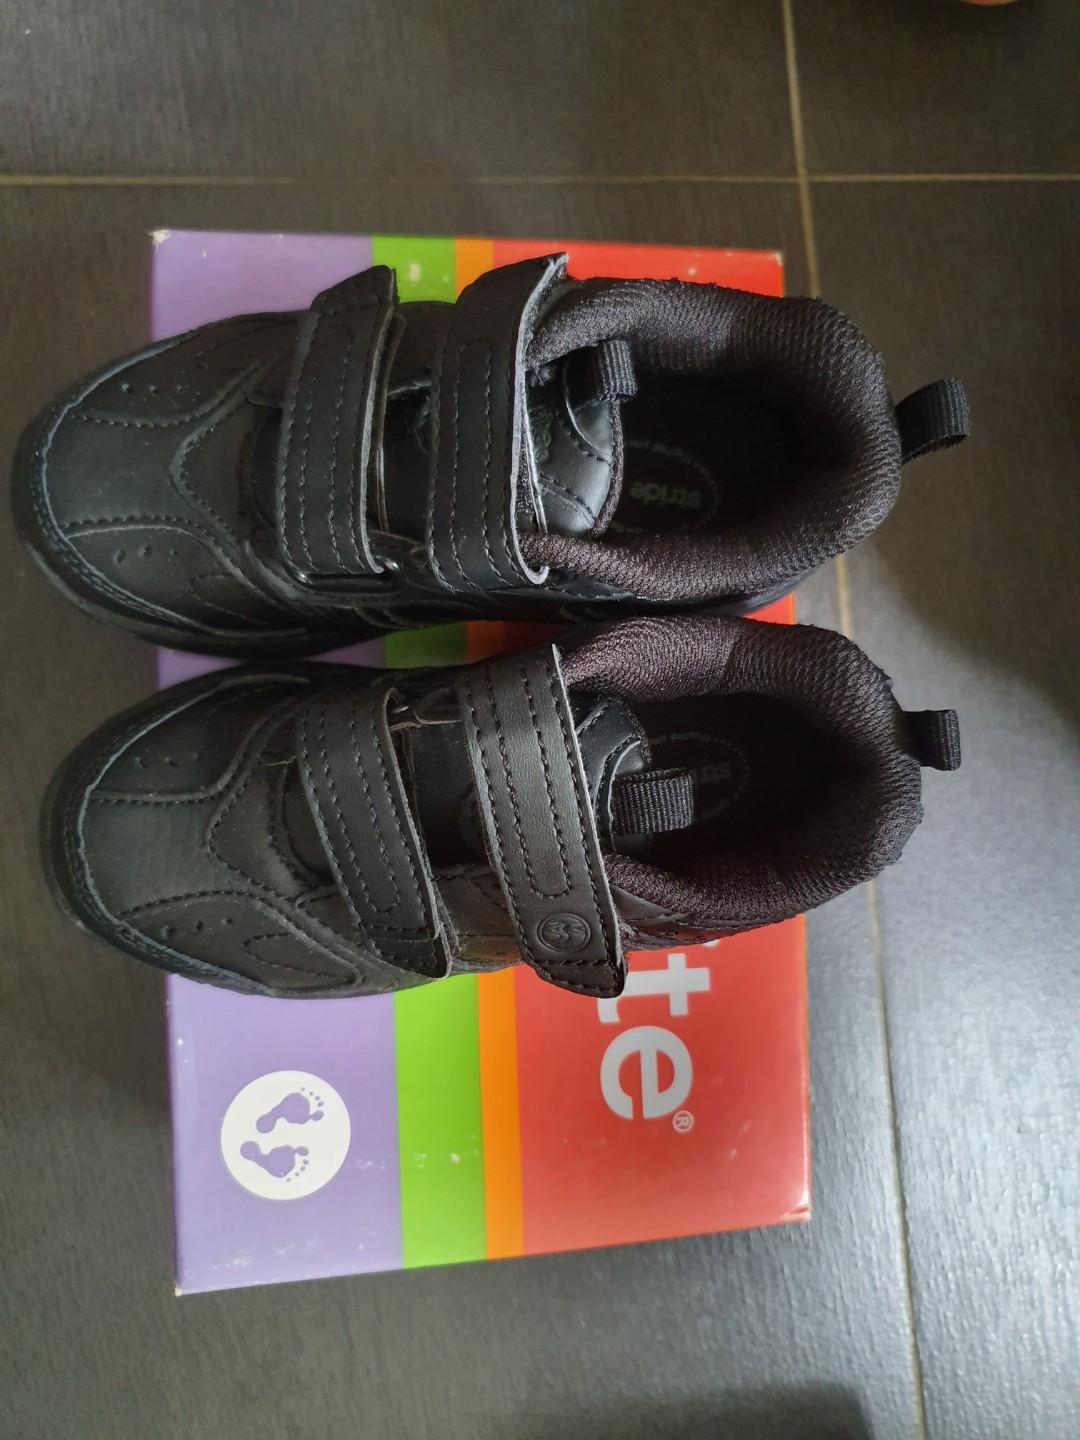 size 8.5 baby shoes